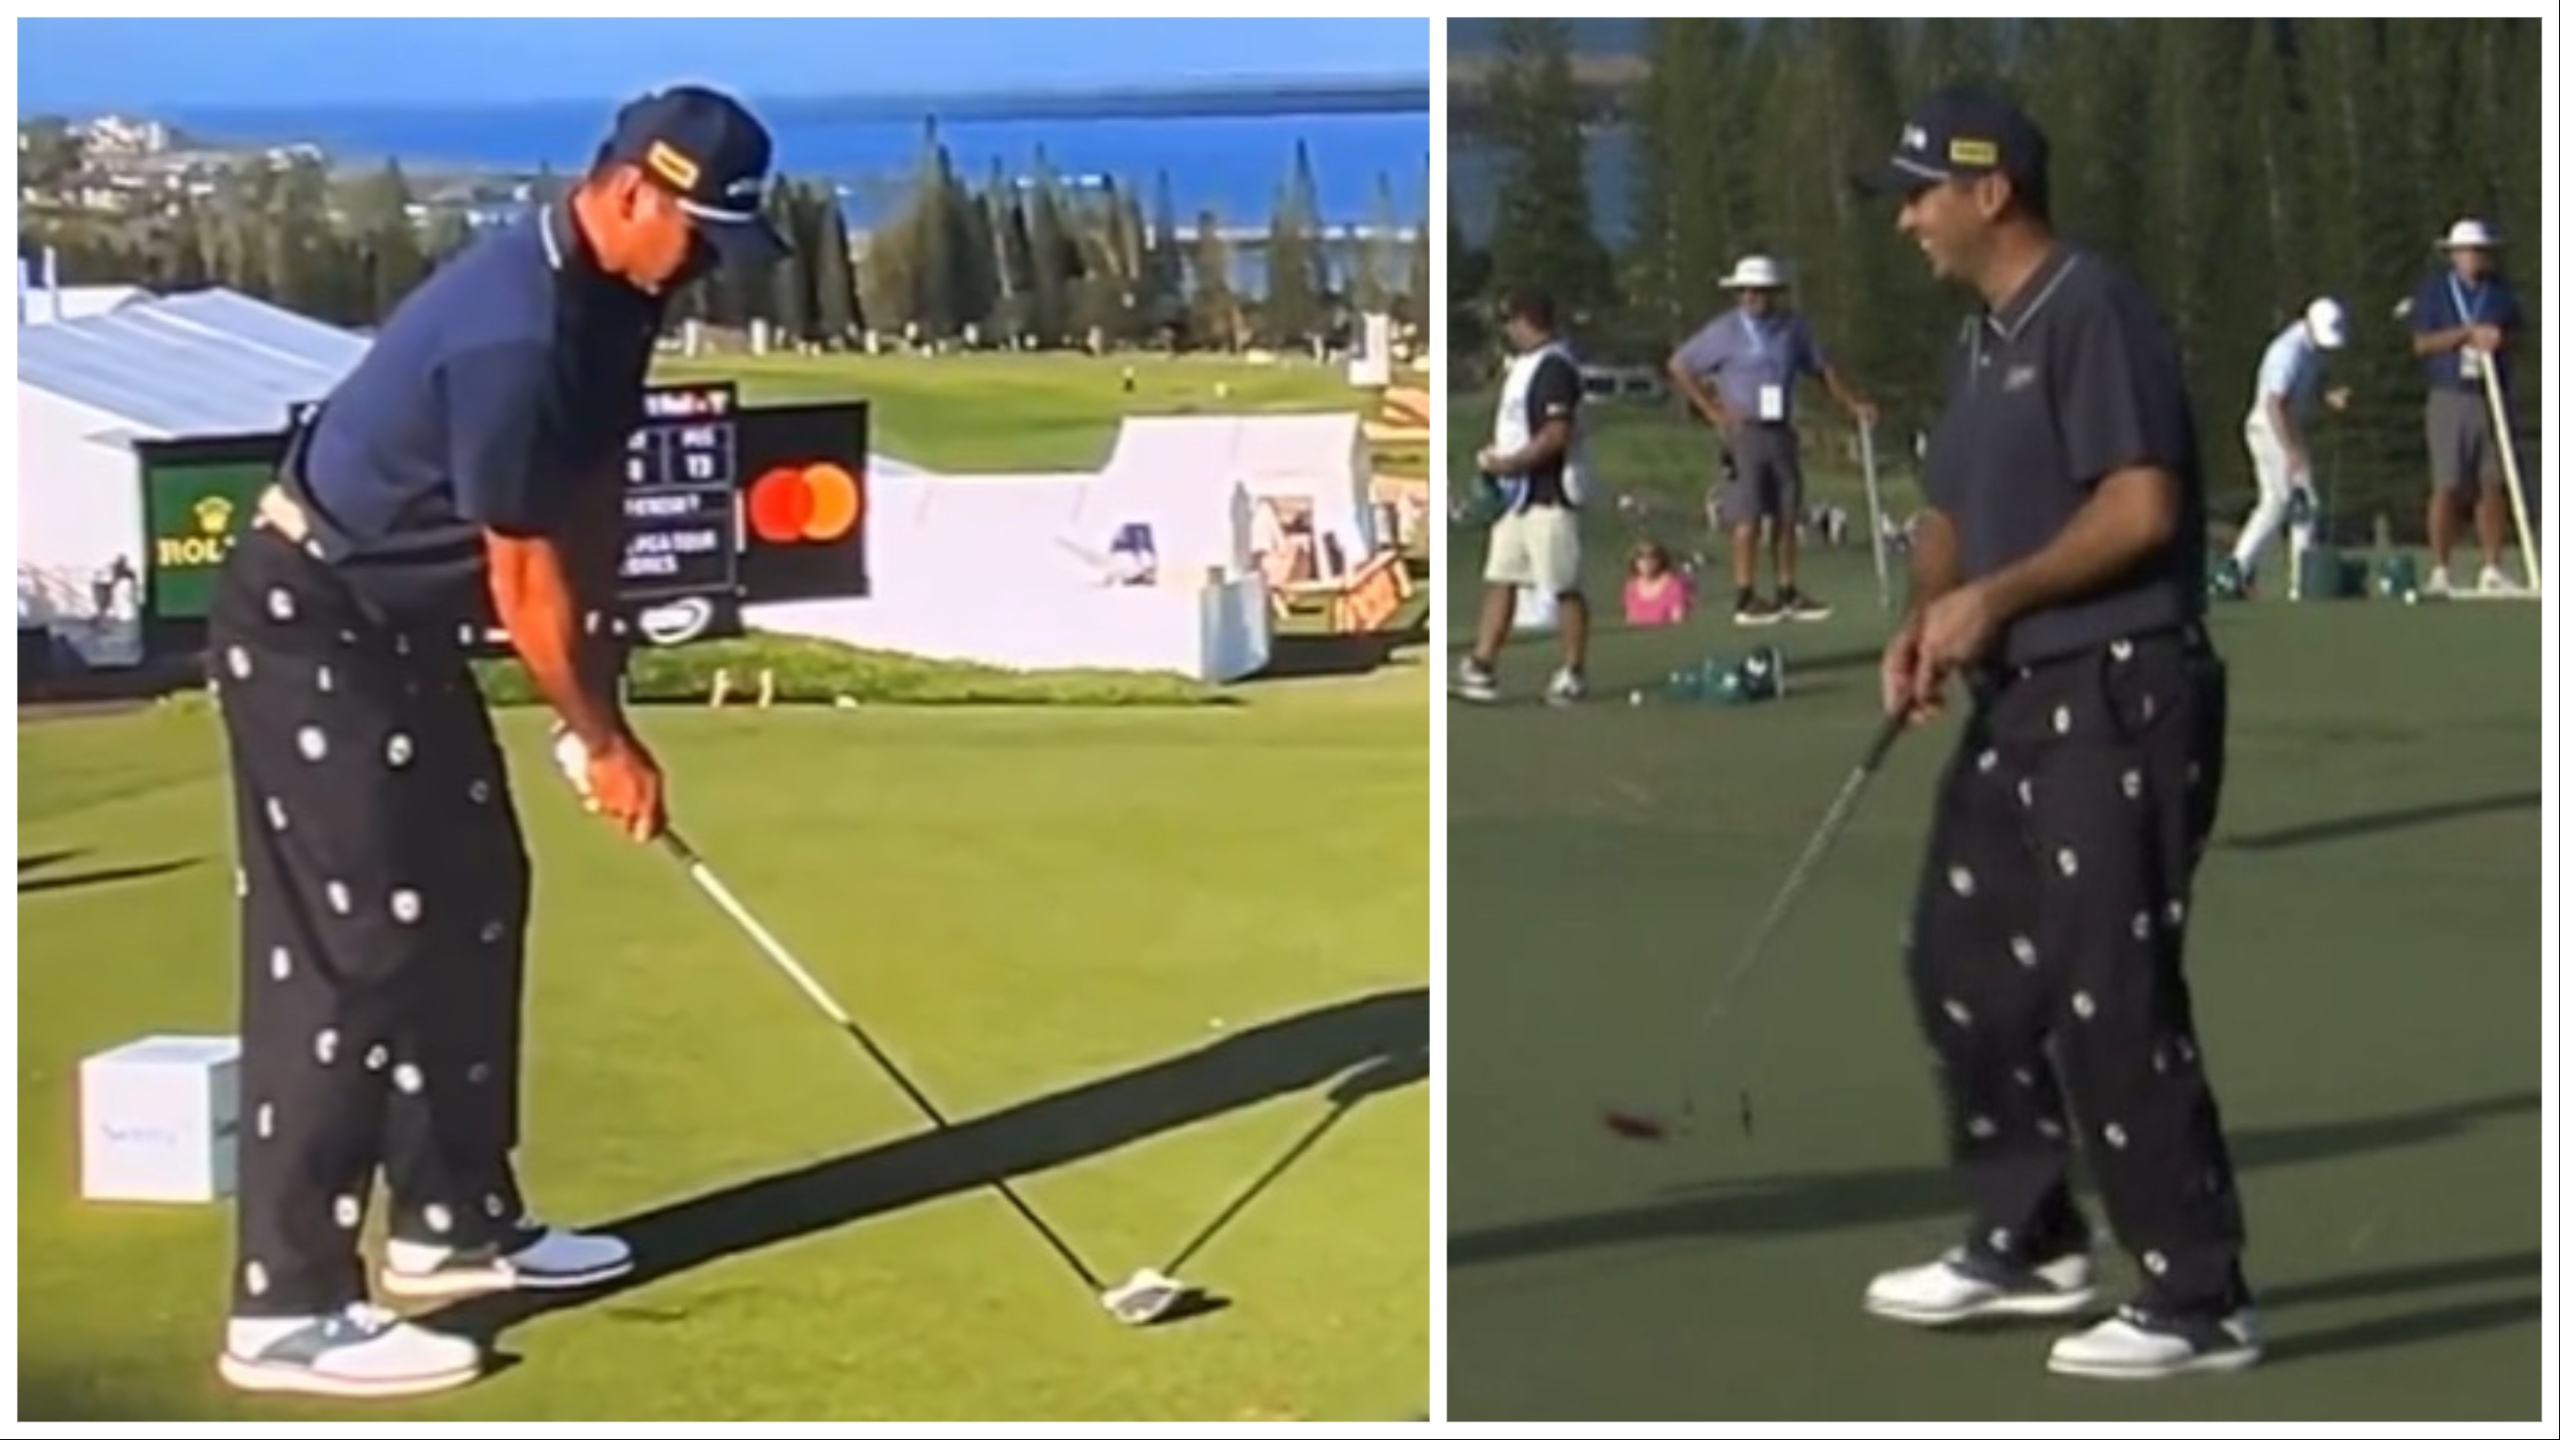 Baggy is back!!” – Fans react to Jason Day's pants choice at The Sentry 2024